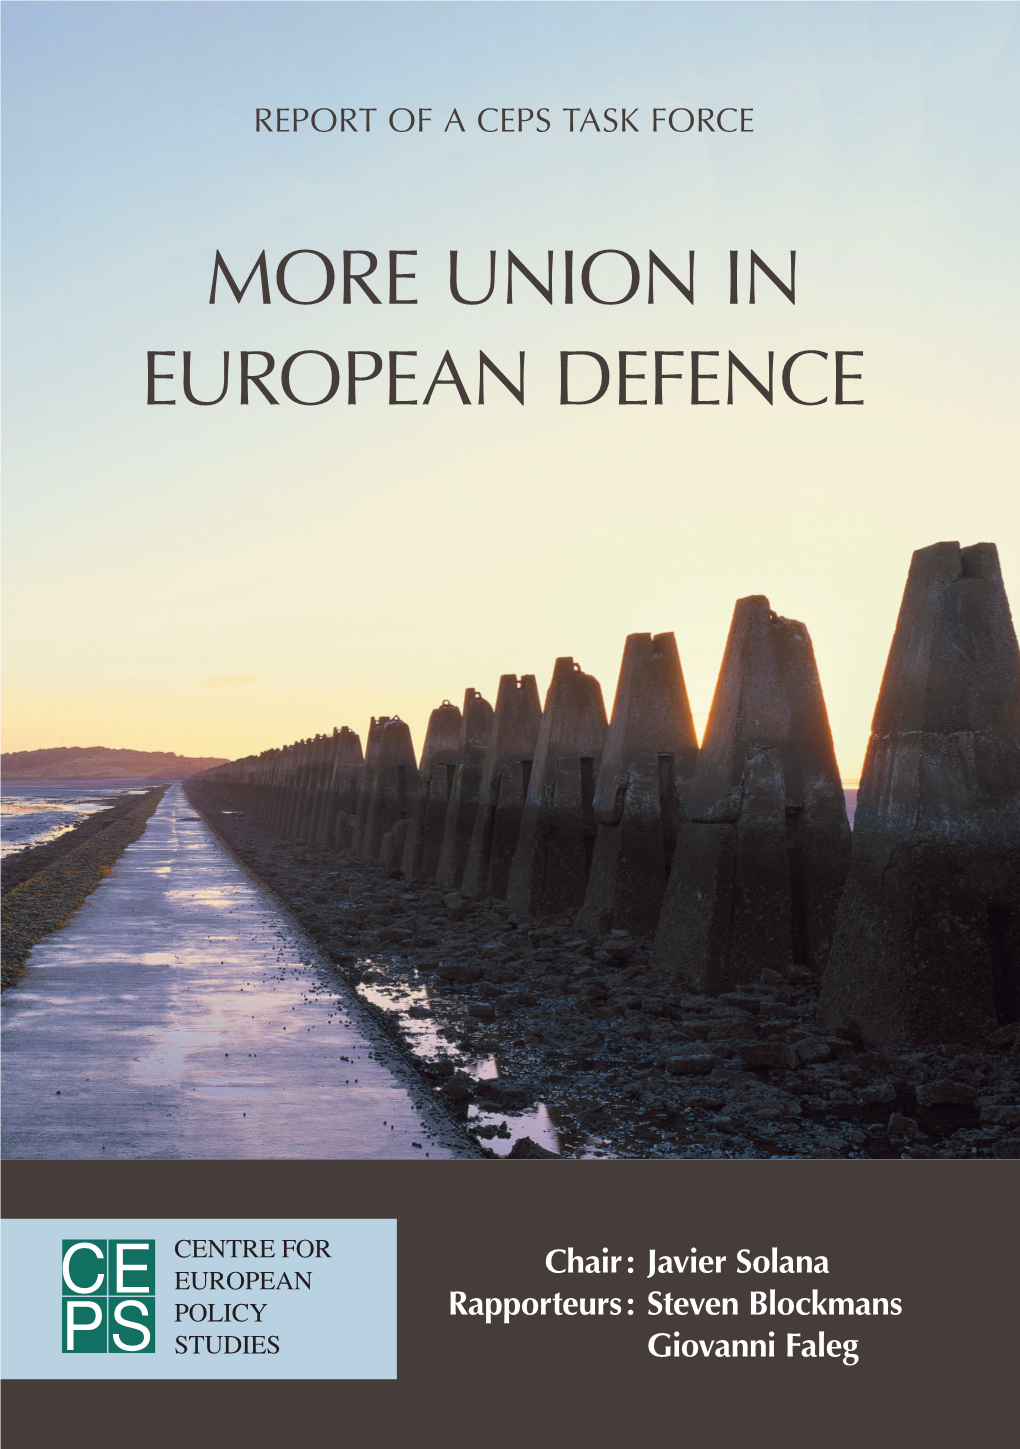 Union in European Defence